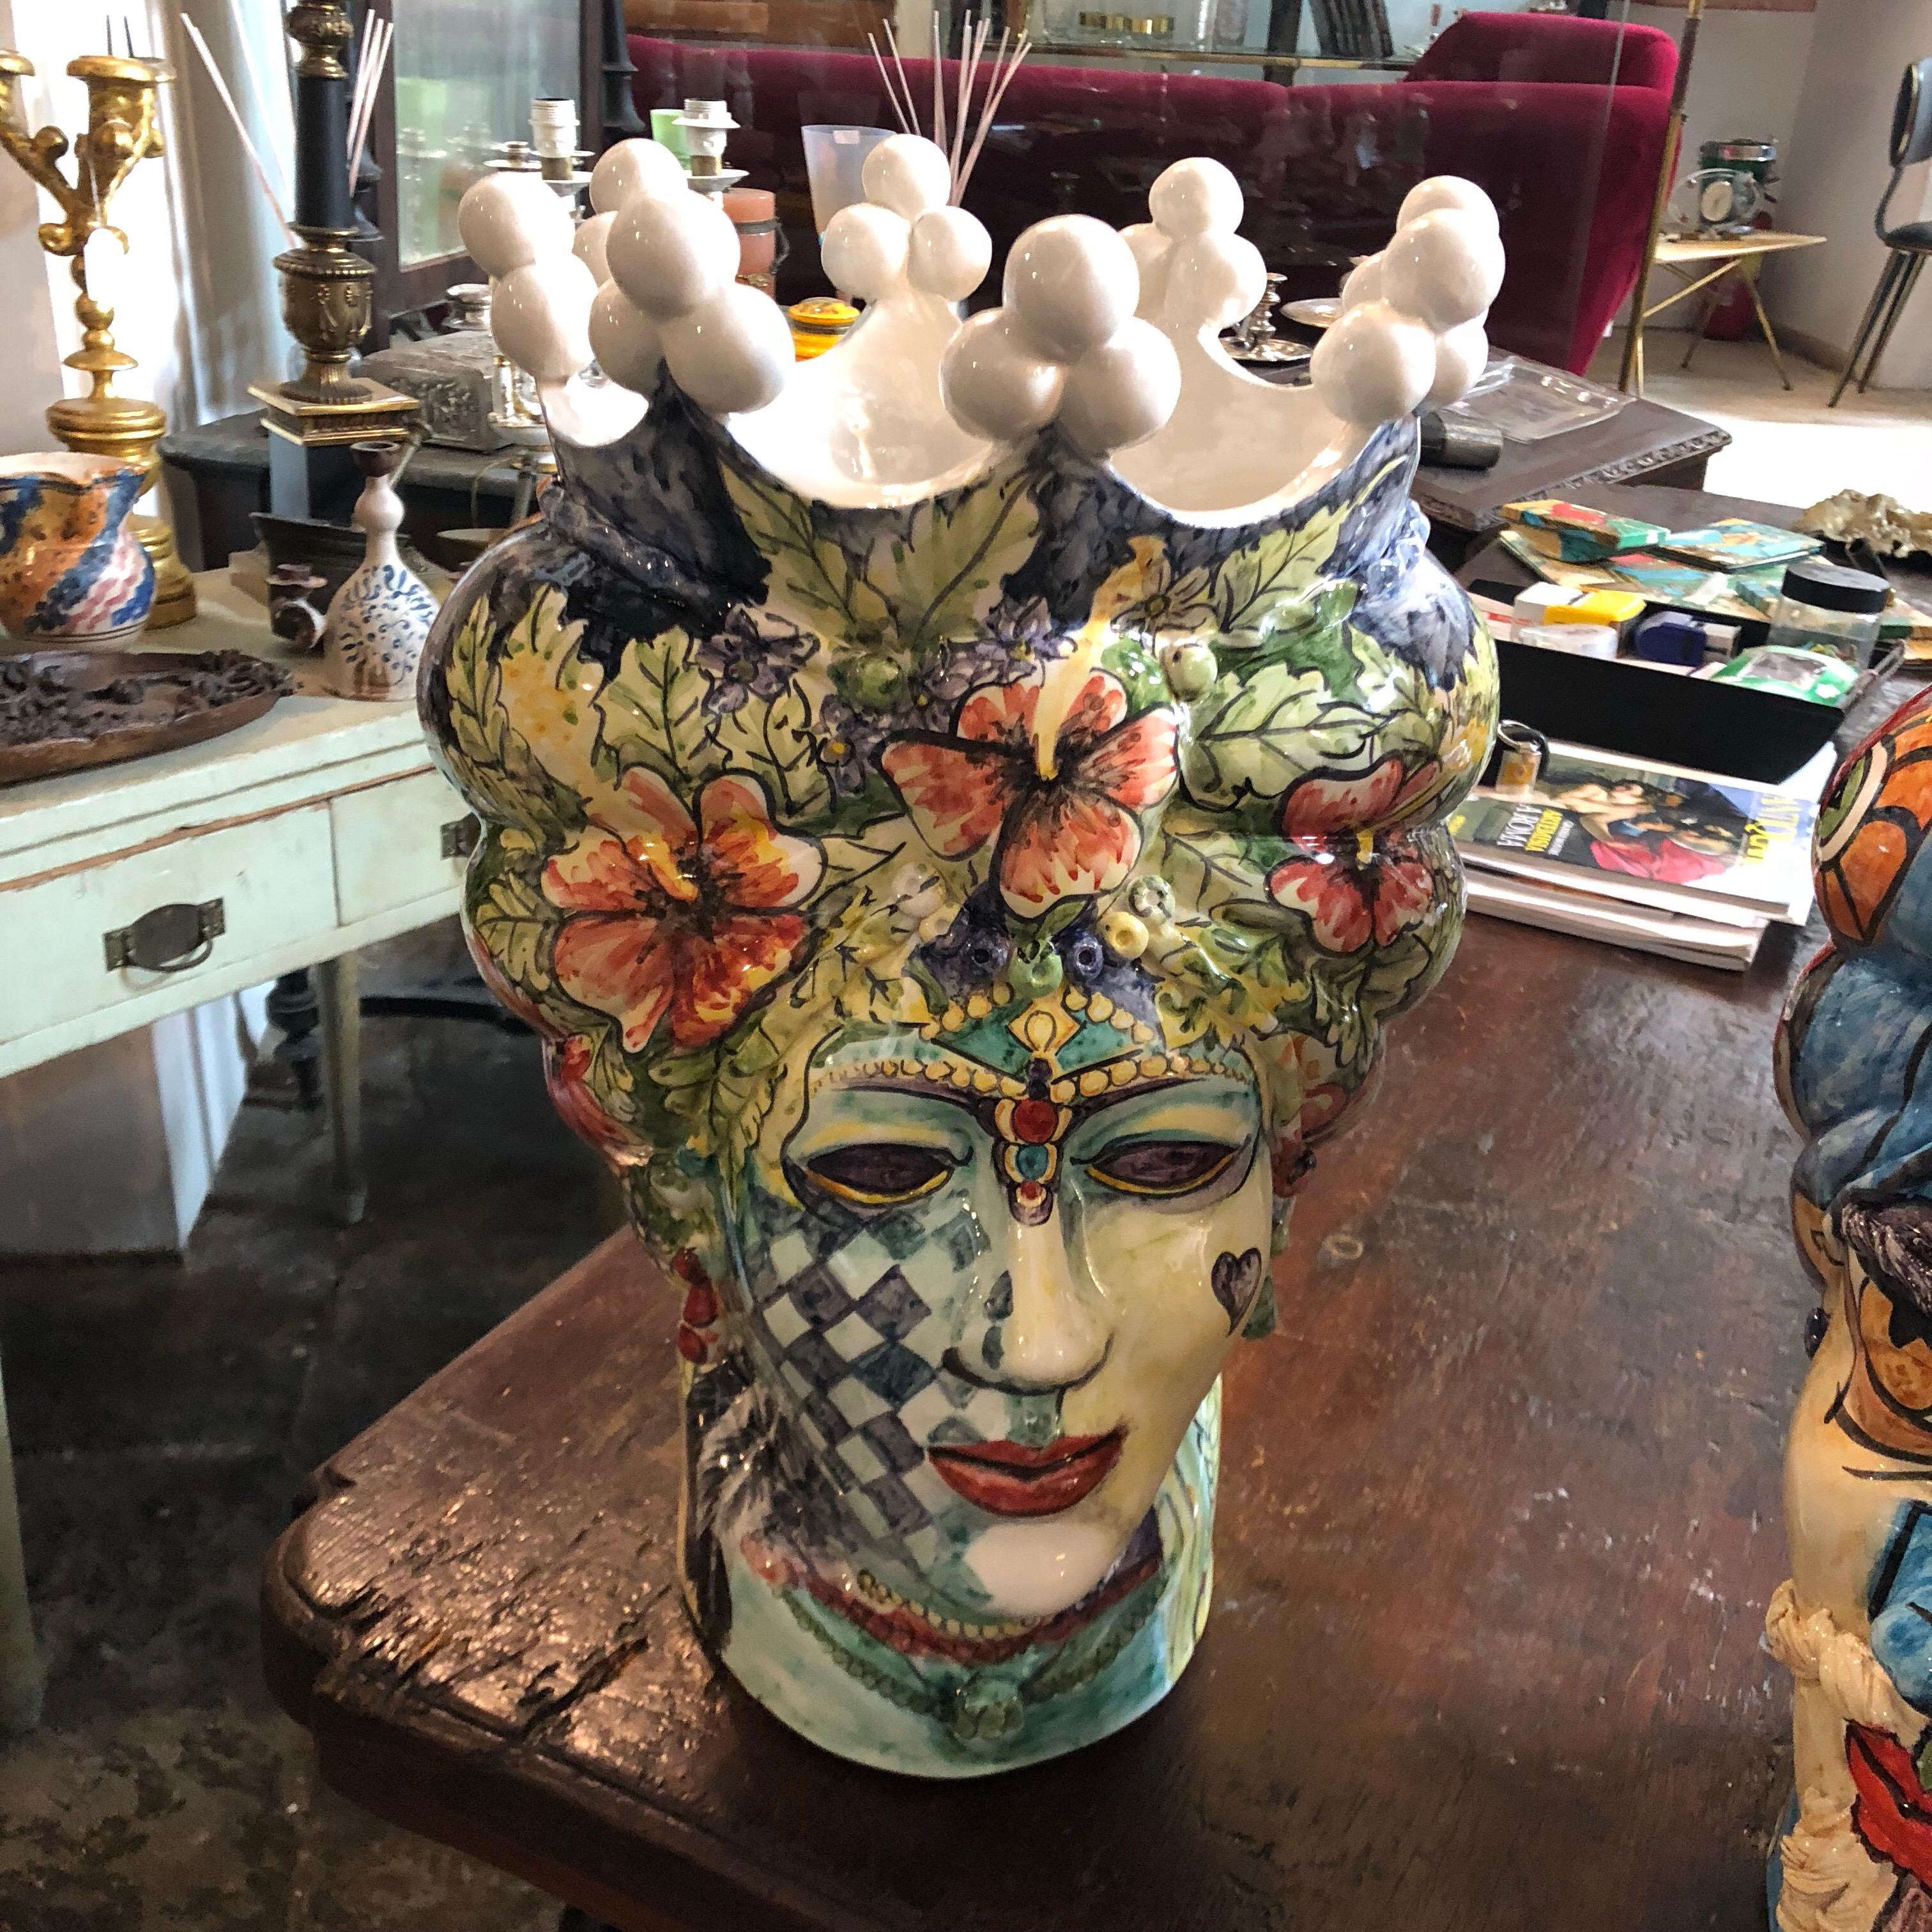 It's an amazing pair of white clay Sicilian Moro's head vases, interpreted in a Pop Art style by a Sicilian young painter and signed 1/1 MR on the base. There are no copies of these, they are unique pieces. The legend of the Sicilian Moro's heads